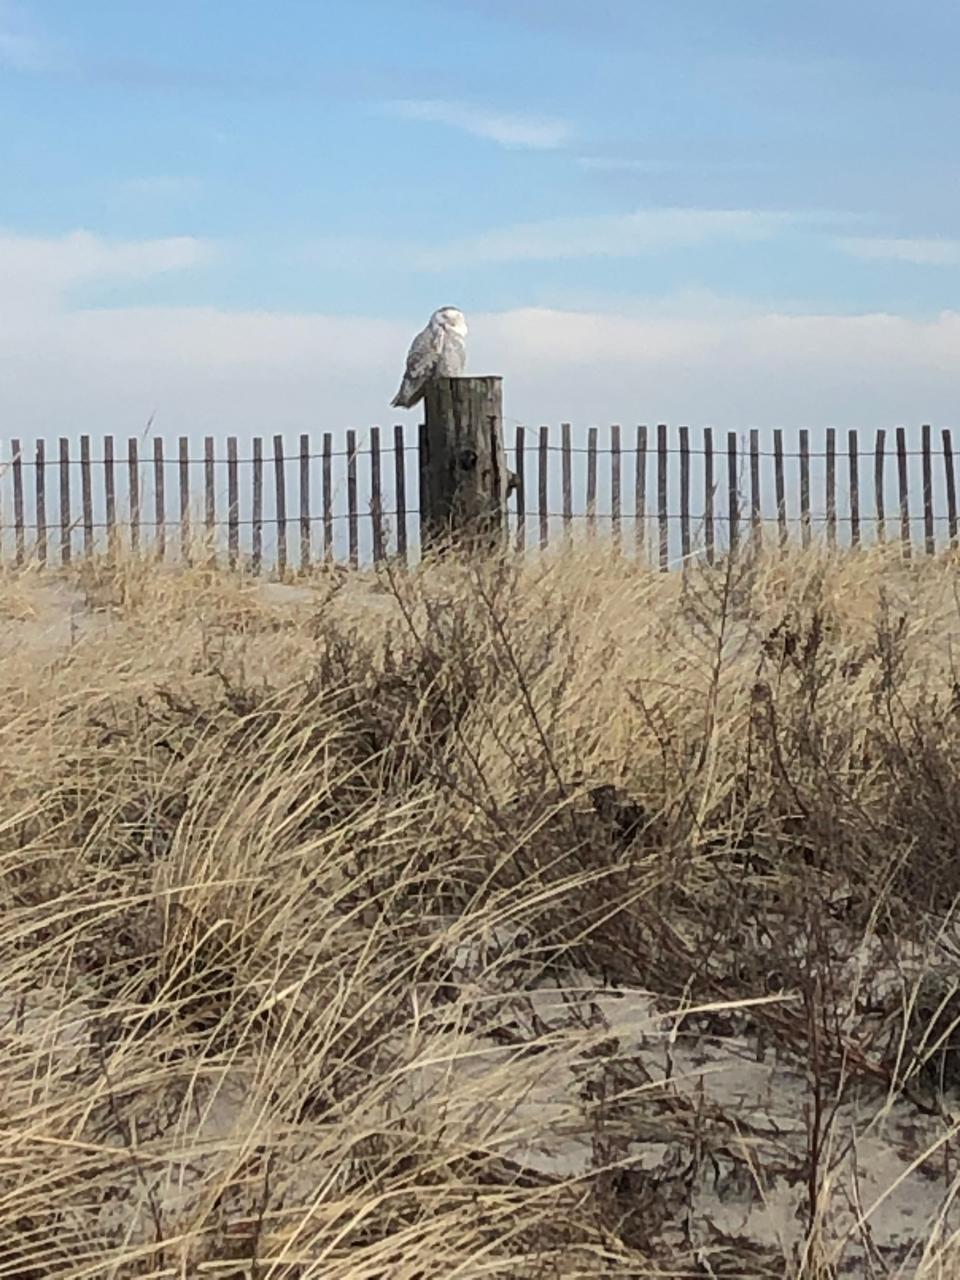 A snowy owl rests on a post at Duxbury Beach.